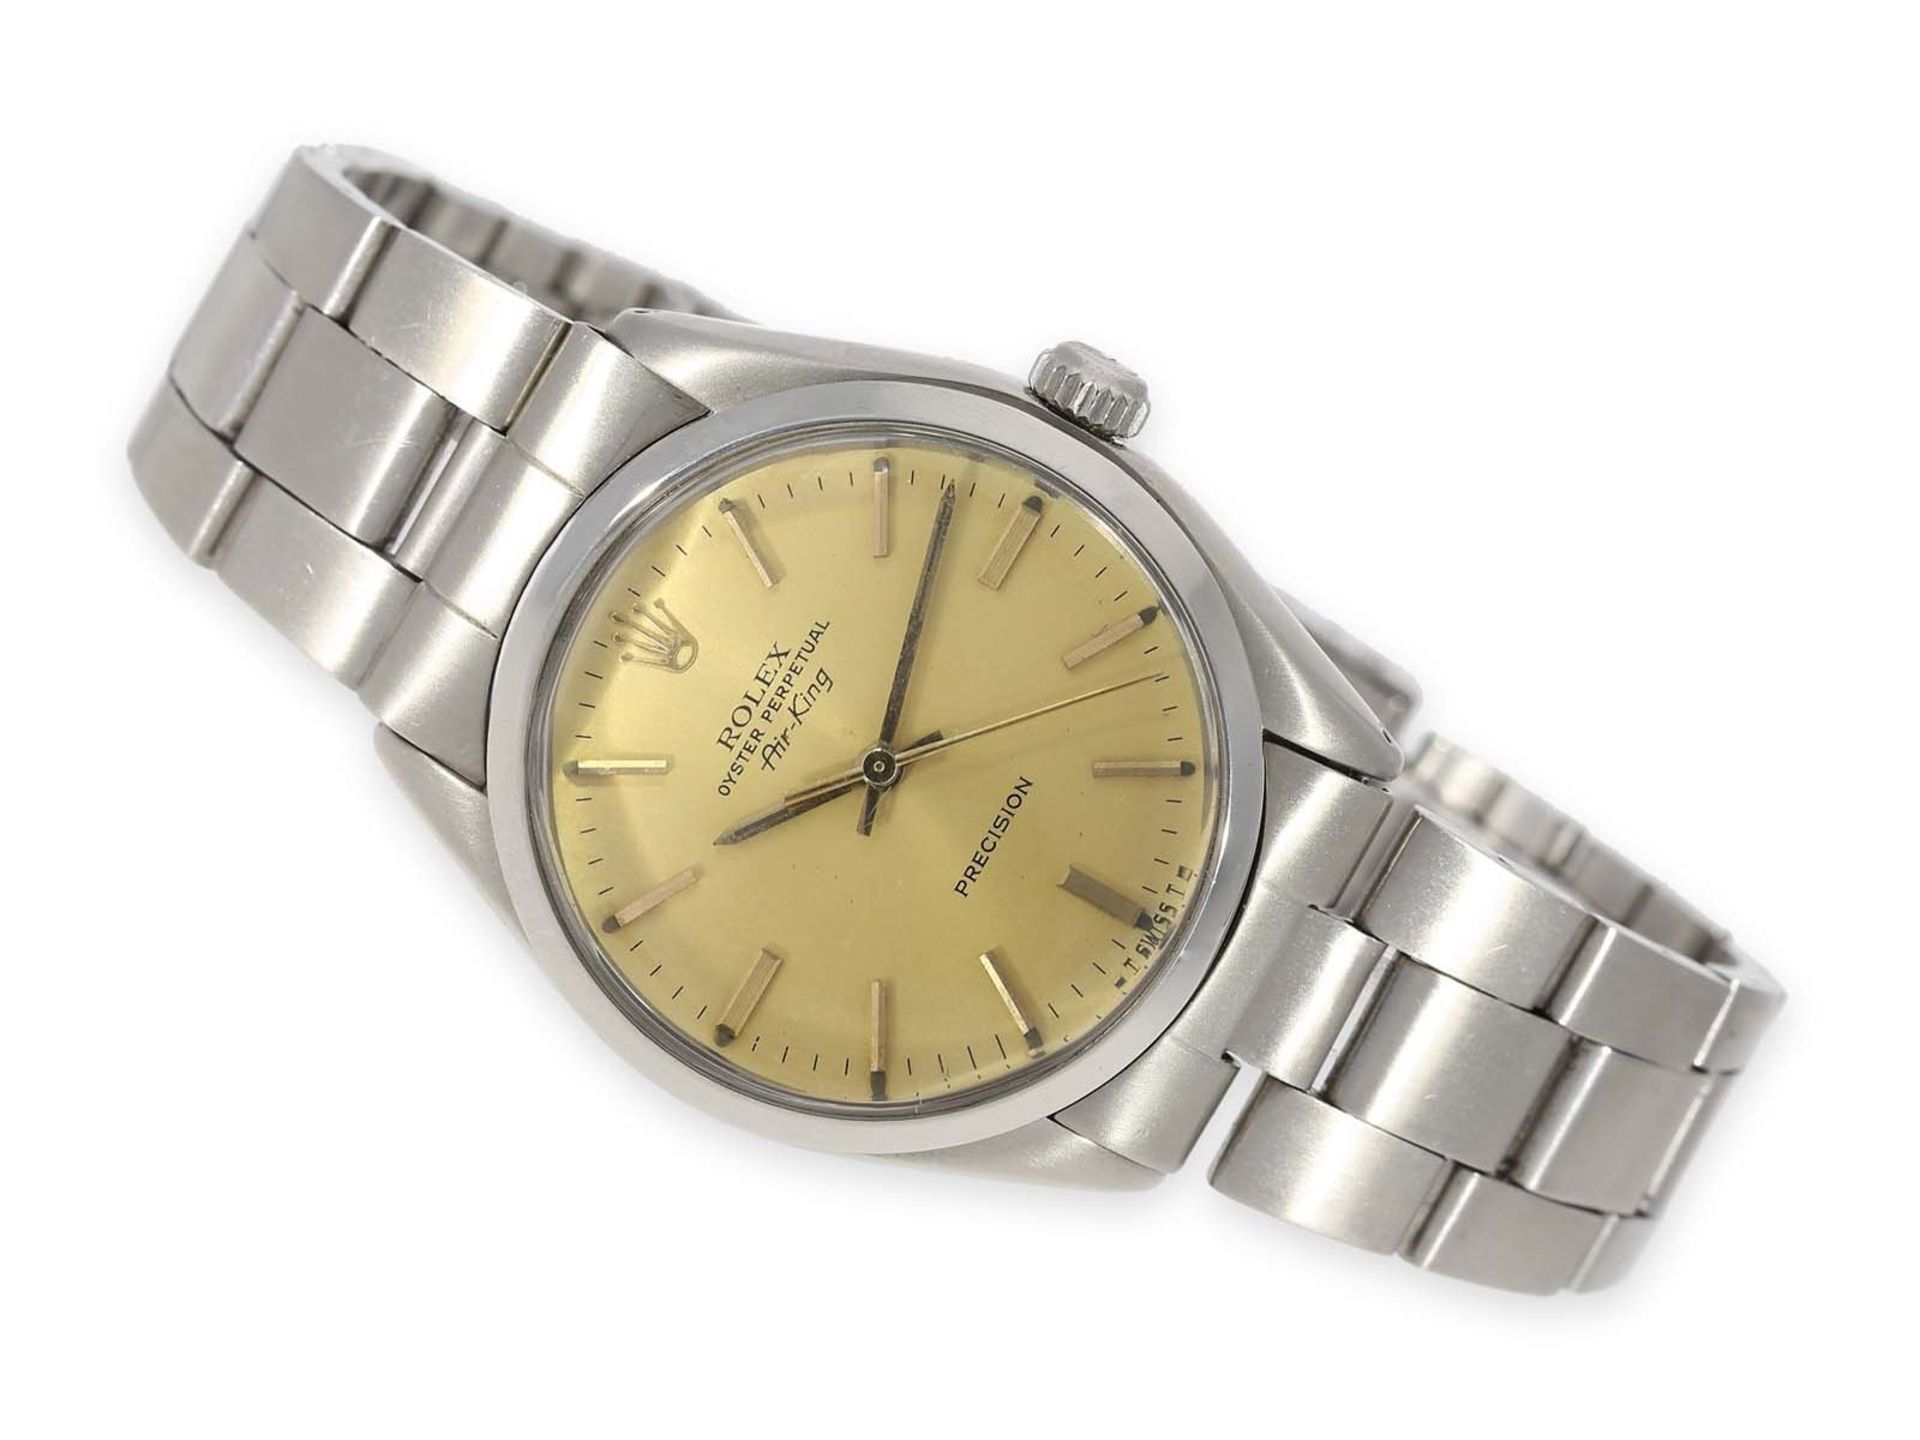 Wristwatch: Rolex Air King Ref. 5500 from 1981, delivery from original ownerCa. Ø34.5mm, stainless